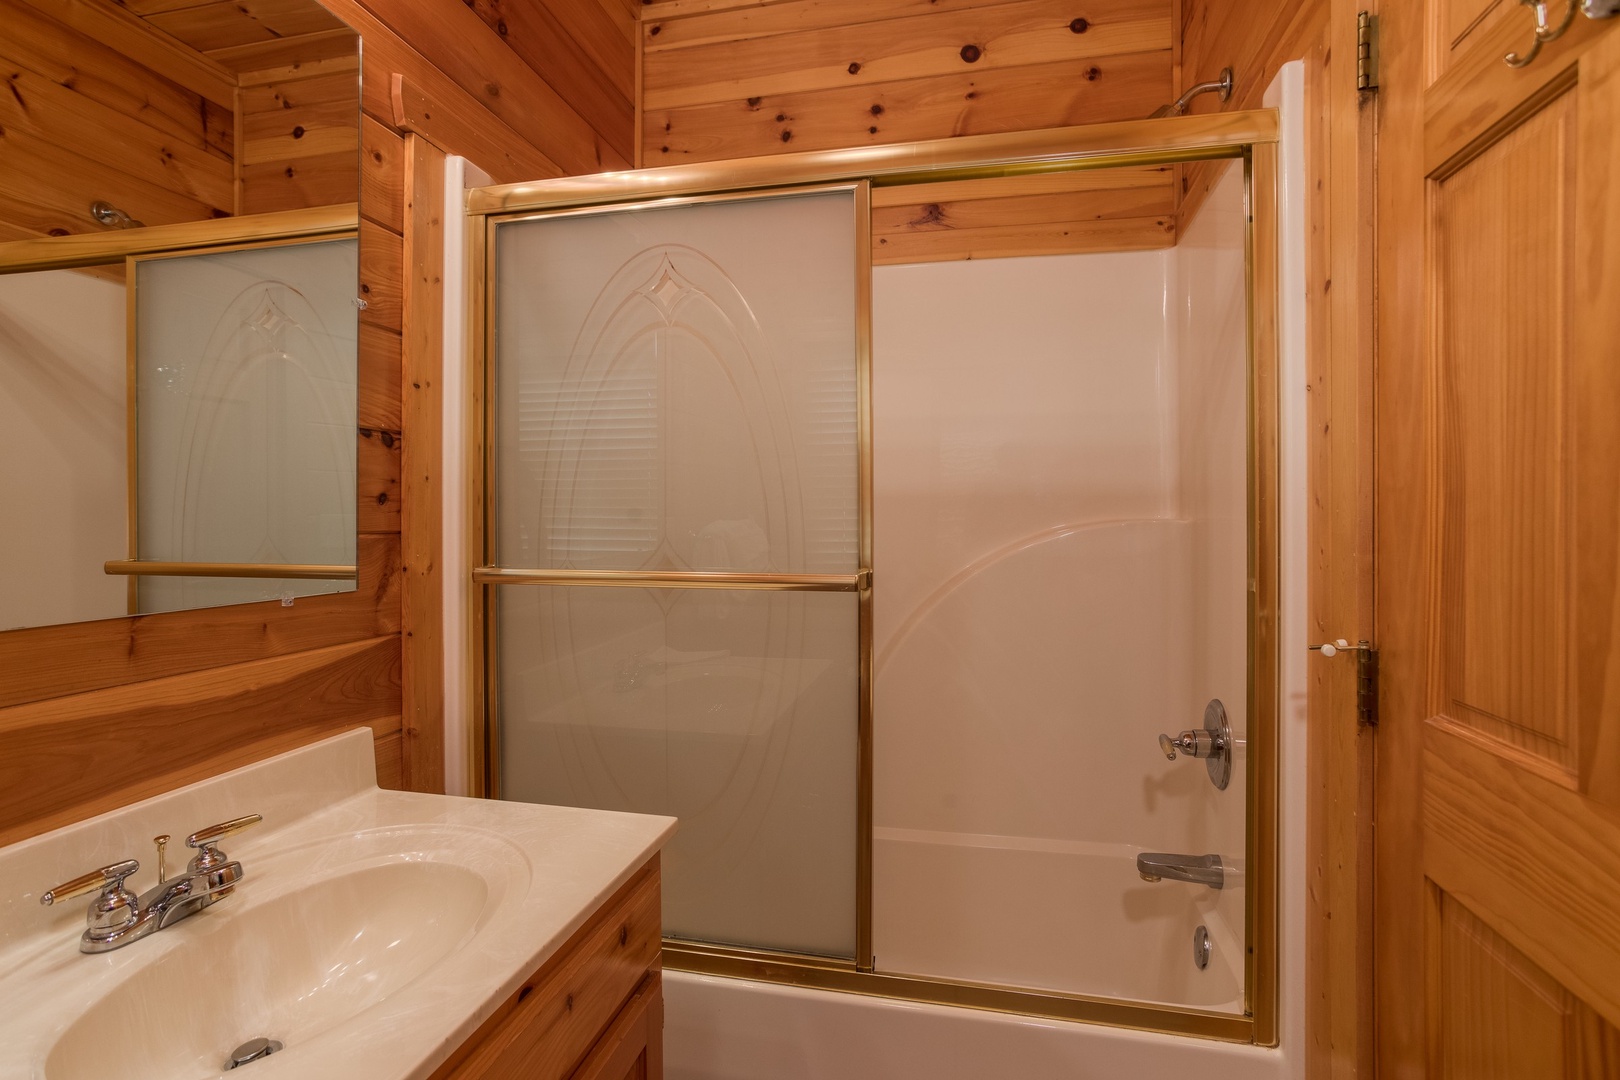 Bathroom with a tub and shower at Howlin' in the Smokies, a 2 bedroom cabin rental located in Pigeon Forge